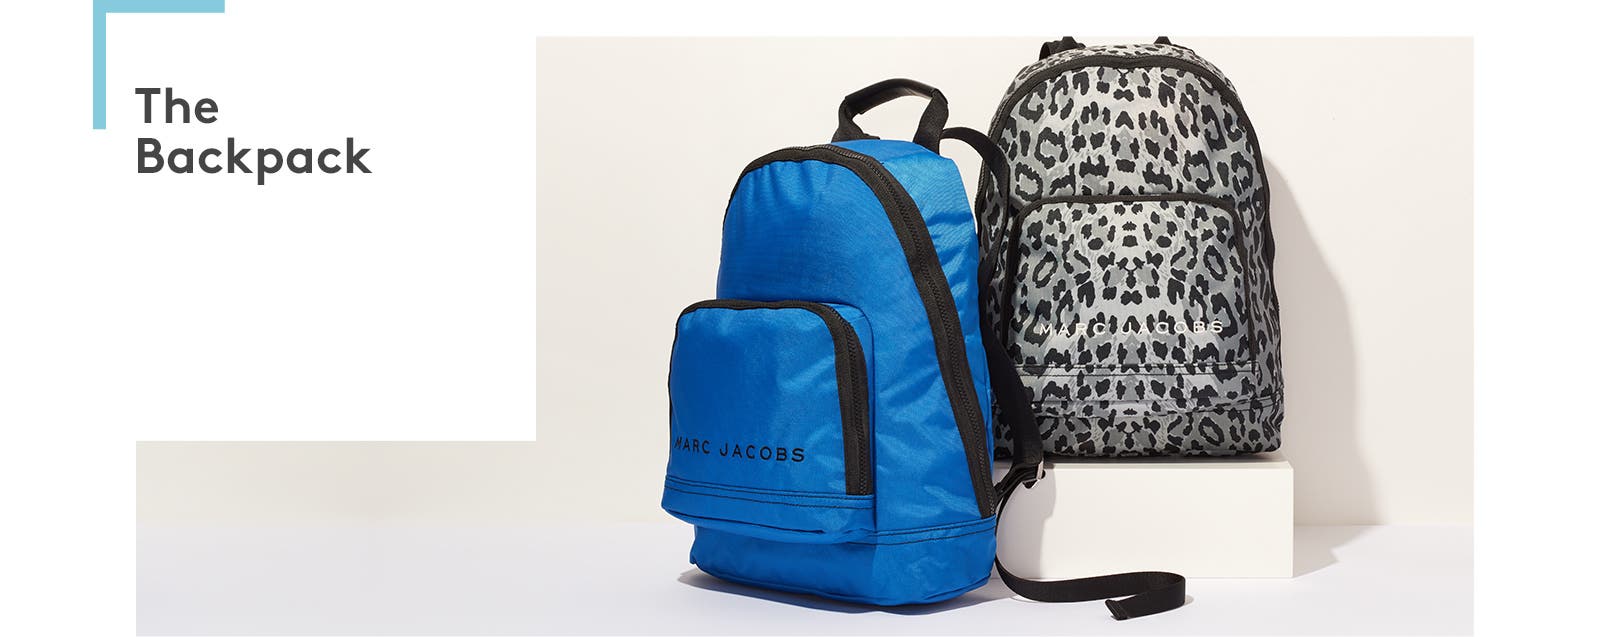 Printed and solid color backpacks.